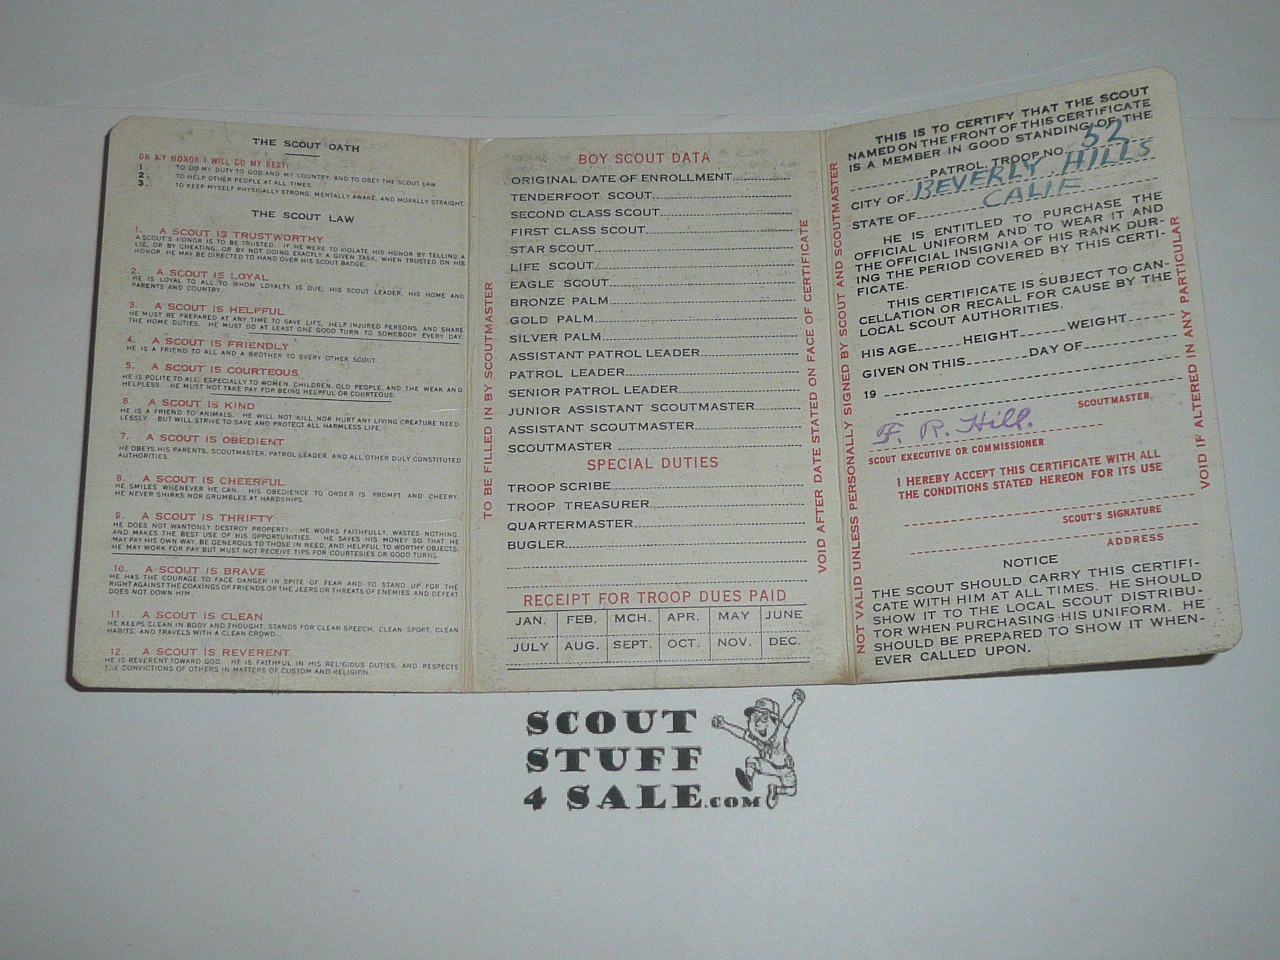 1937 Boy Scout Membership Card, 3-fold, with the Envelope, 7 signatures, Stamped Sea Scout, expires April 1937, BSMC184